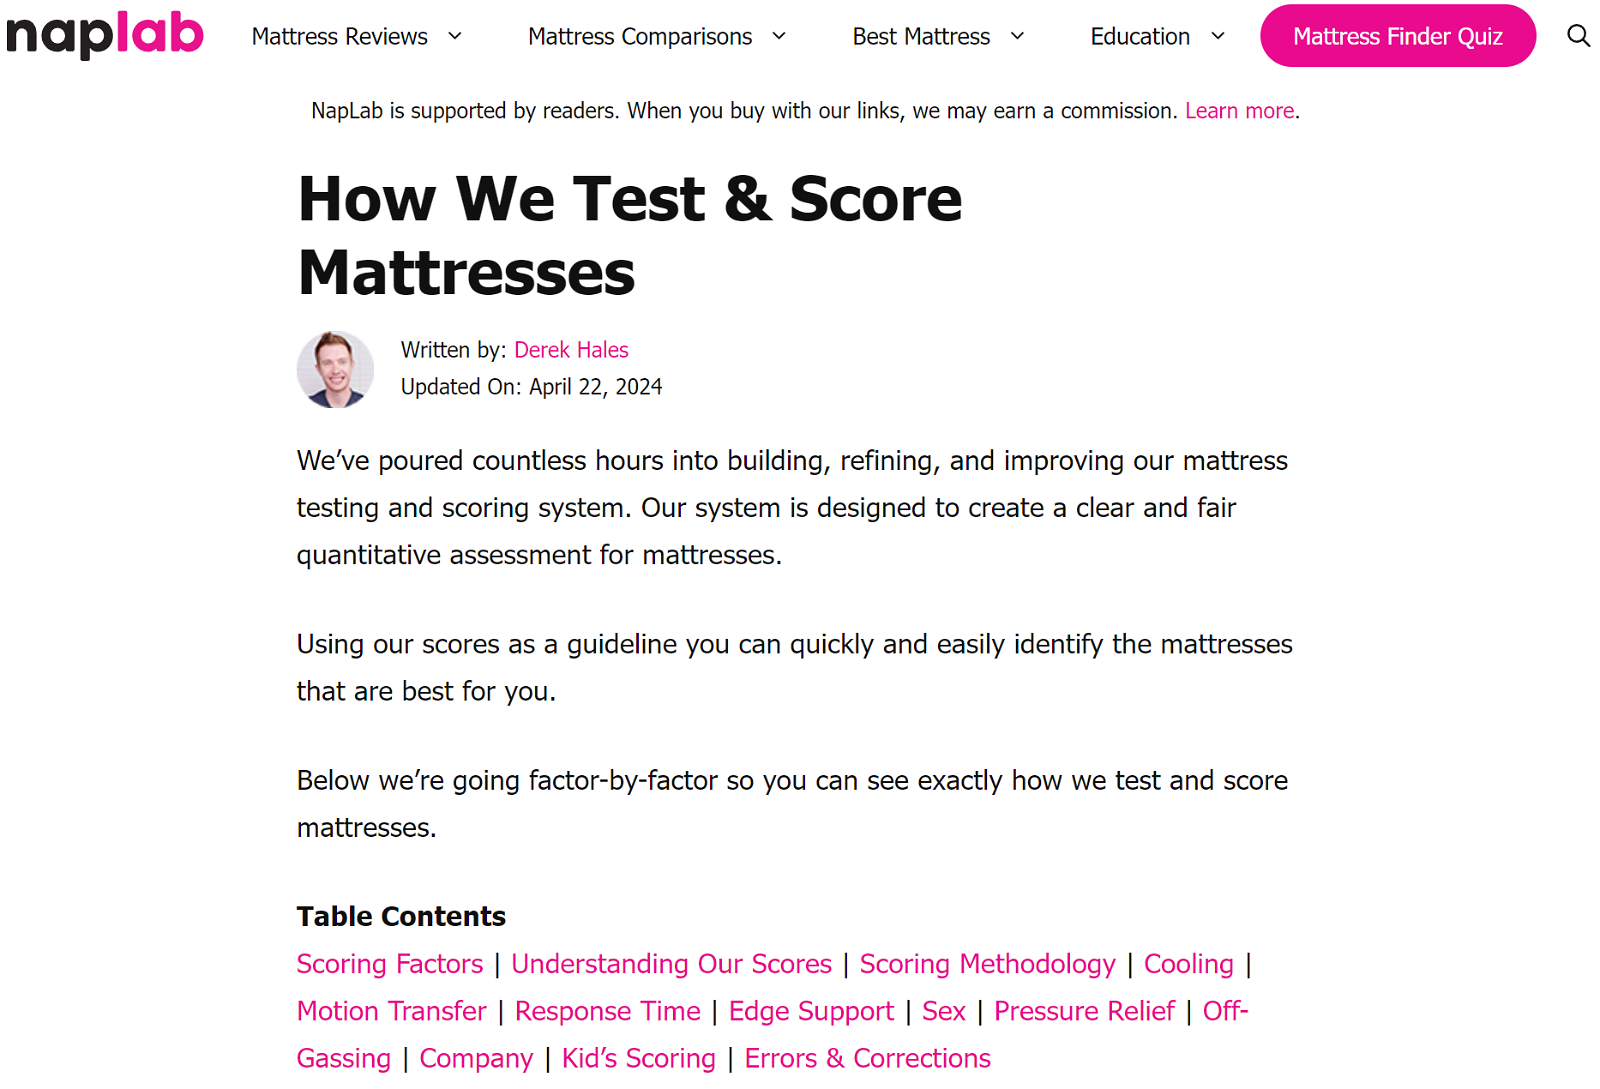 NapLab’s review methodology page